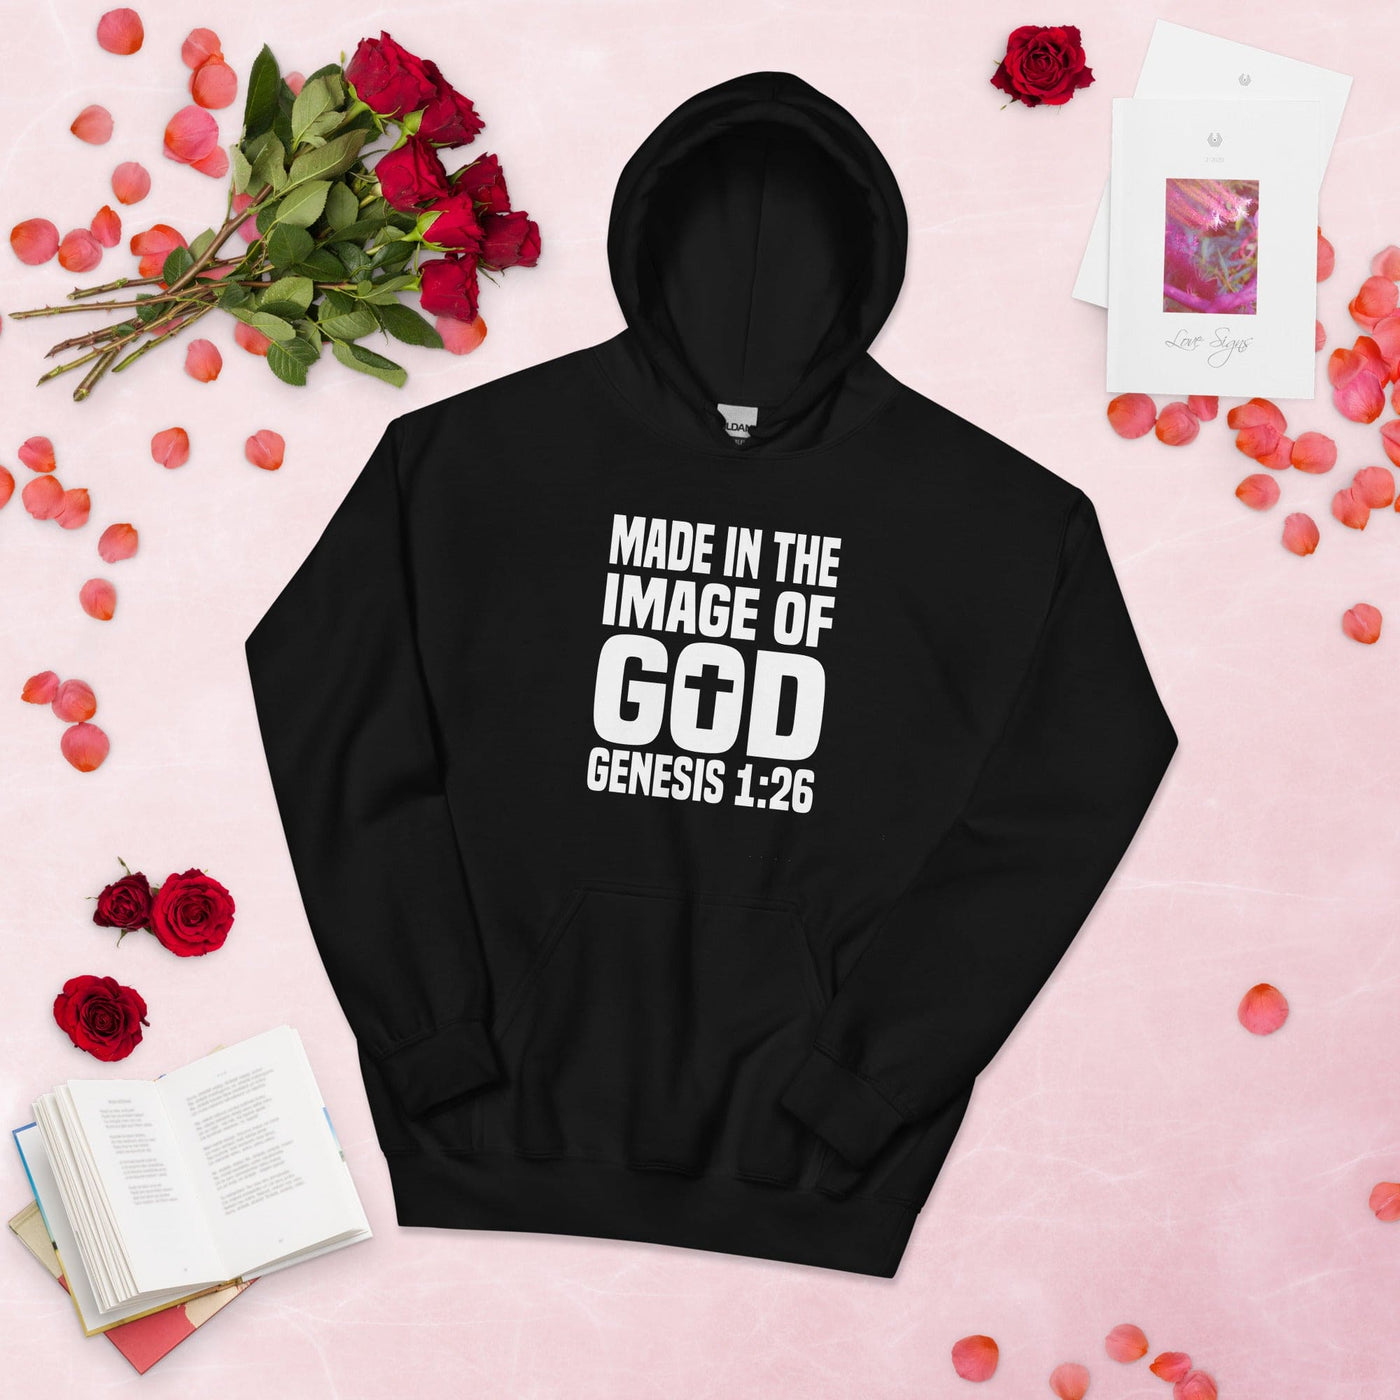 F&H Christian Made In The Image Of God Womens Hoodie